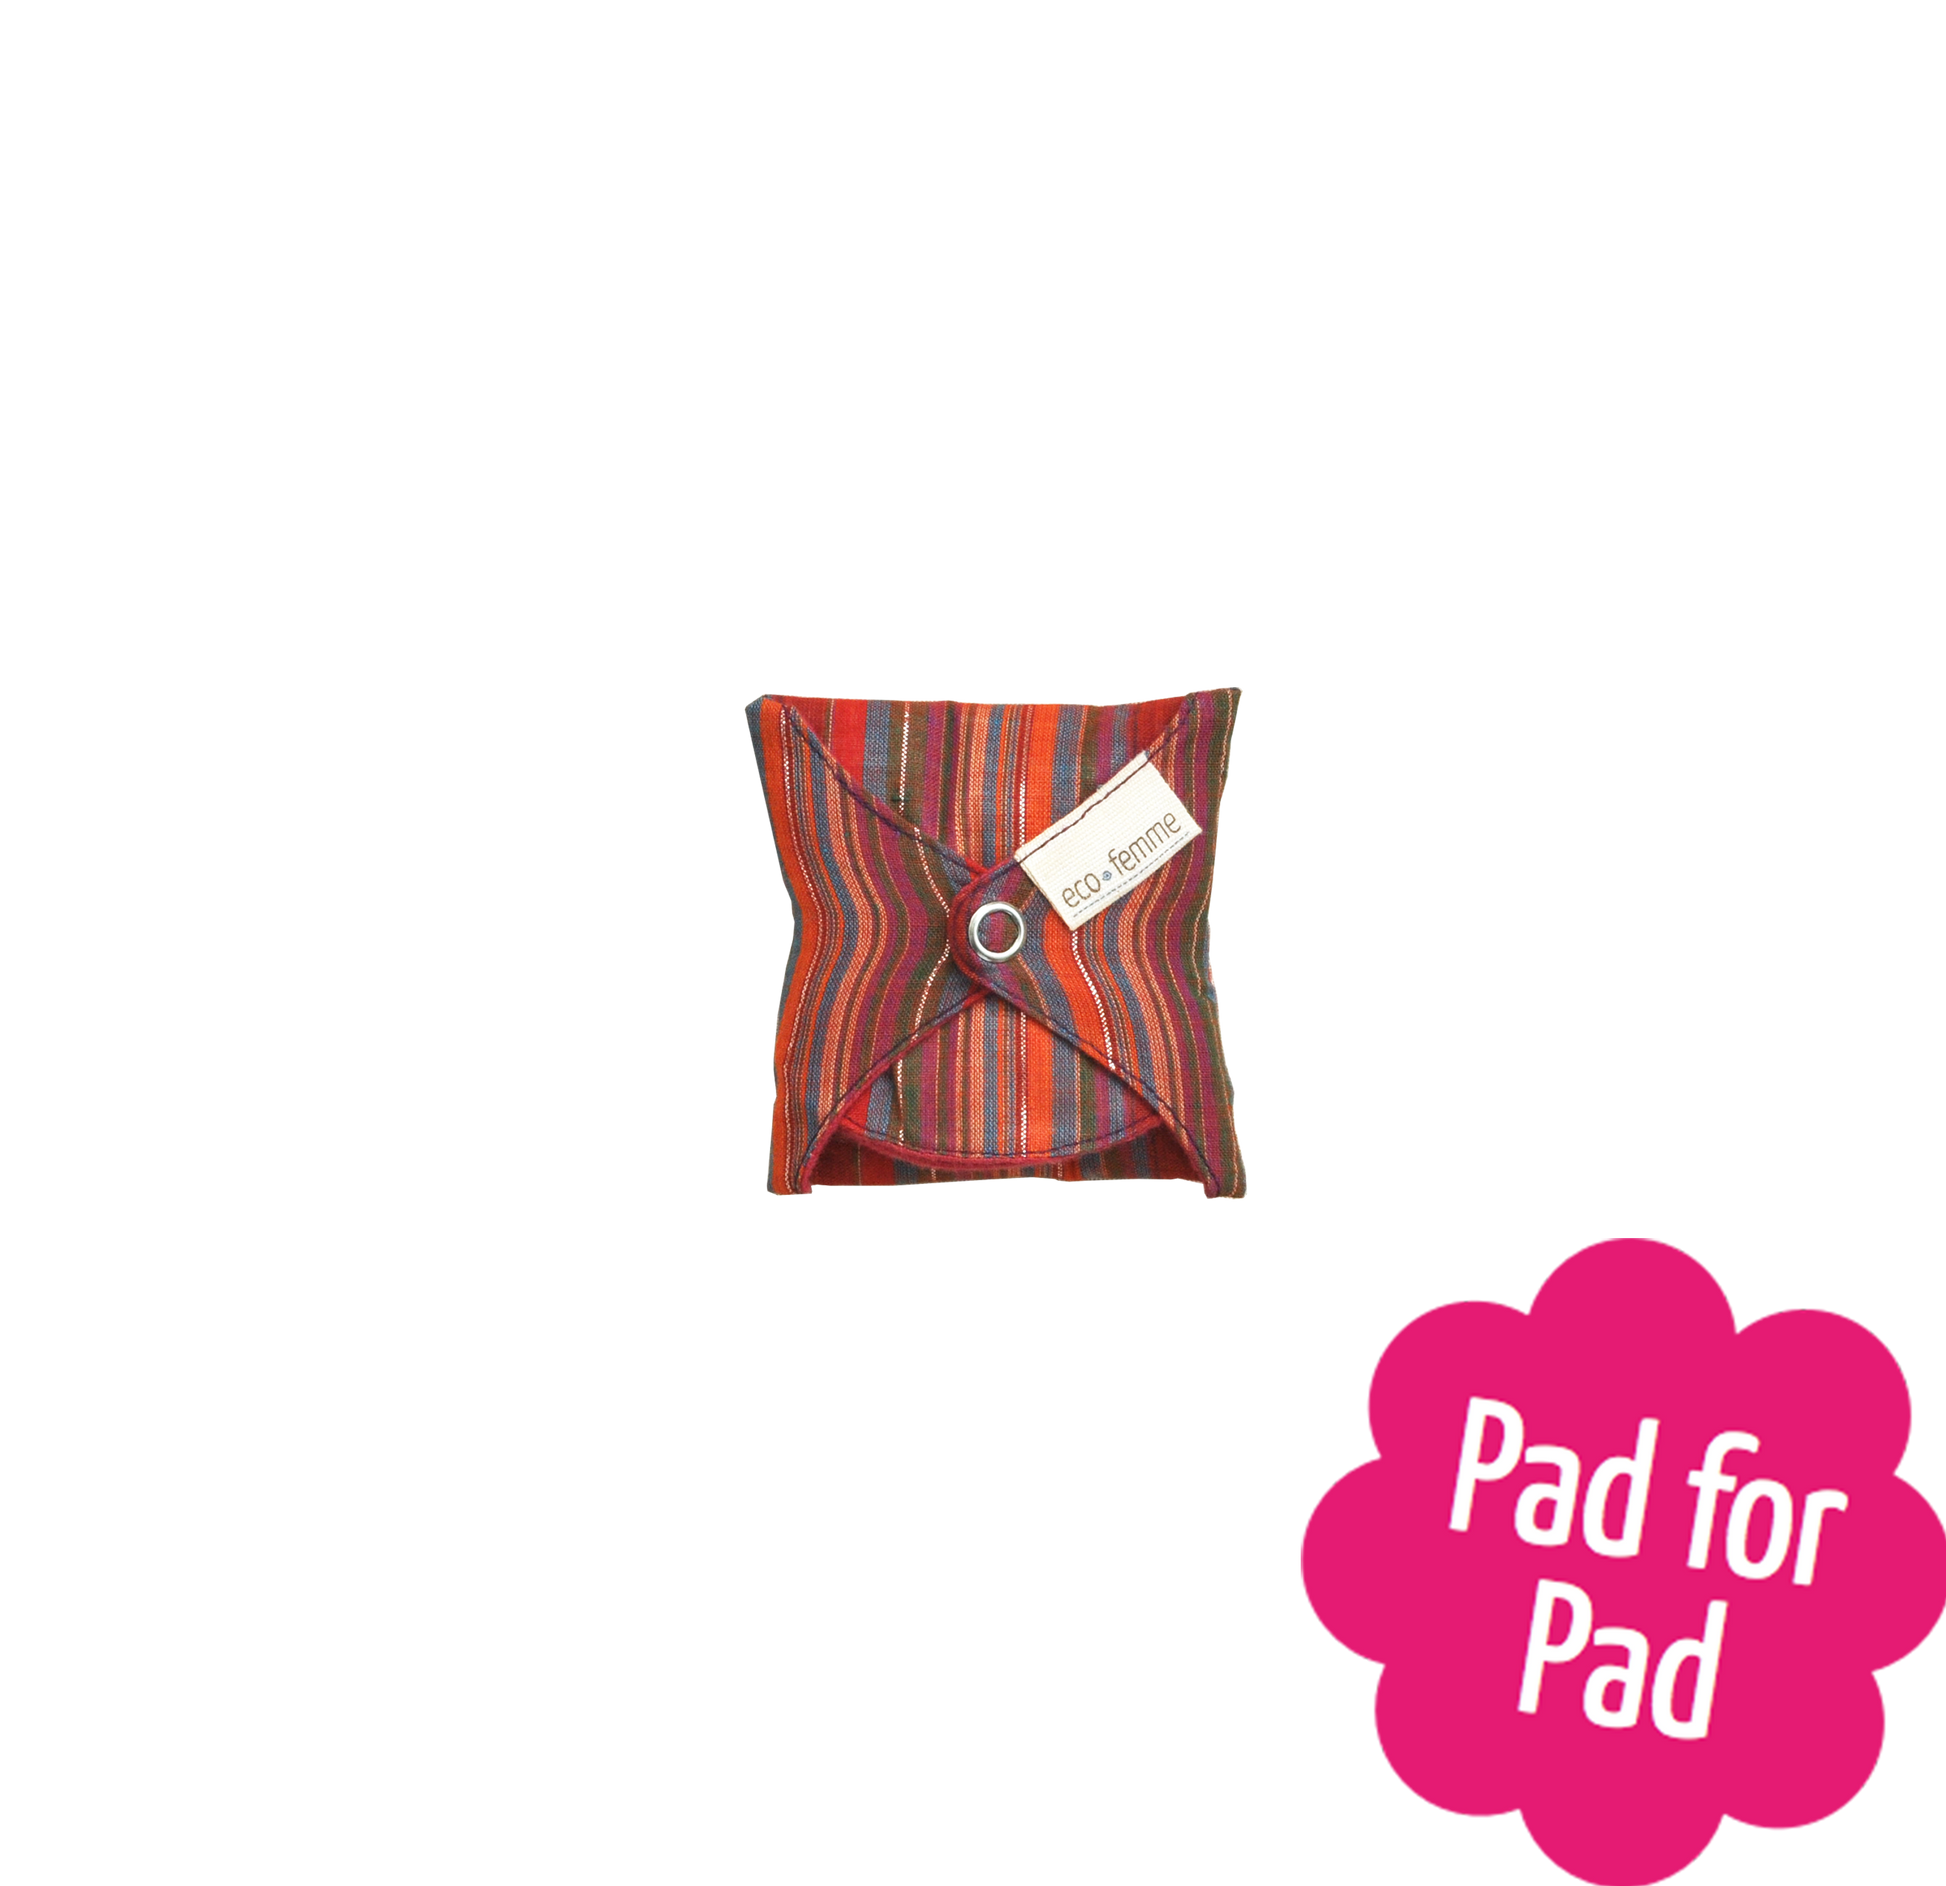 Reusable and eco-friendly menstrual pad, providing sustainable period care during the night